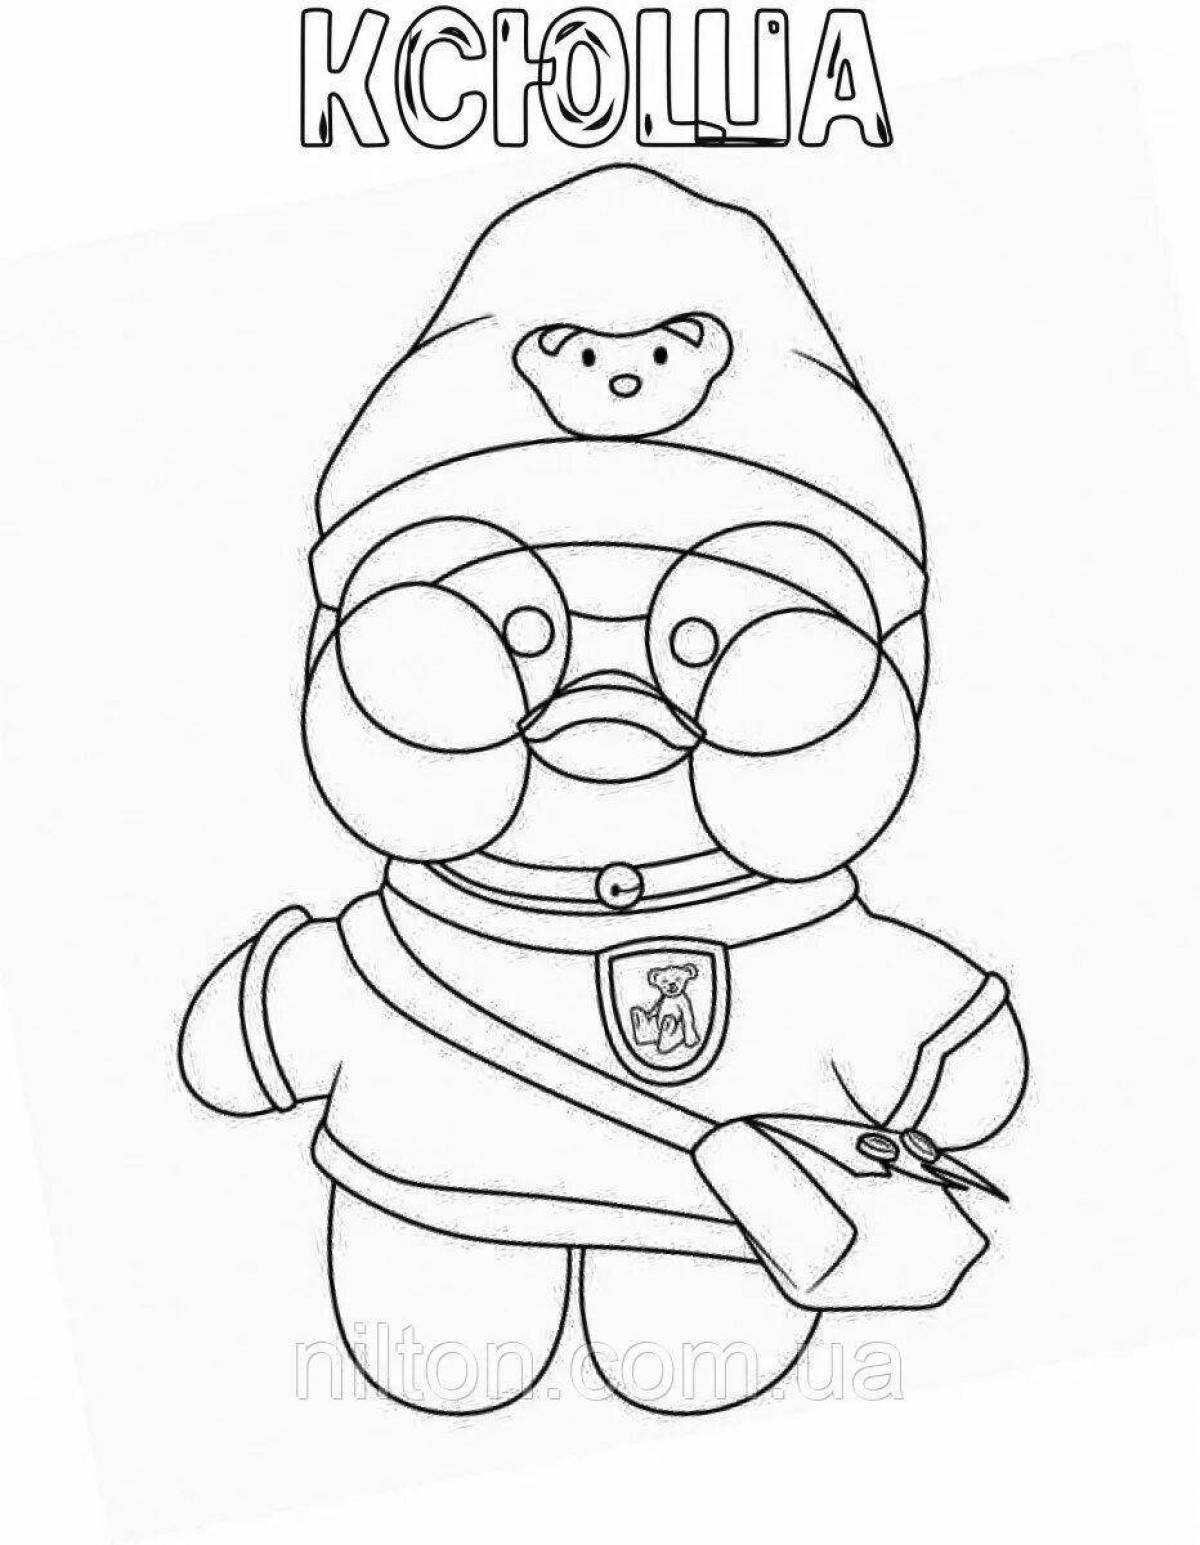 Animated duckling coloring page - lalafanfan